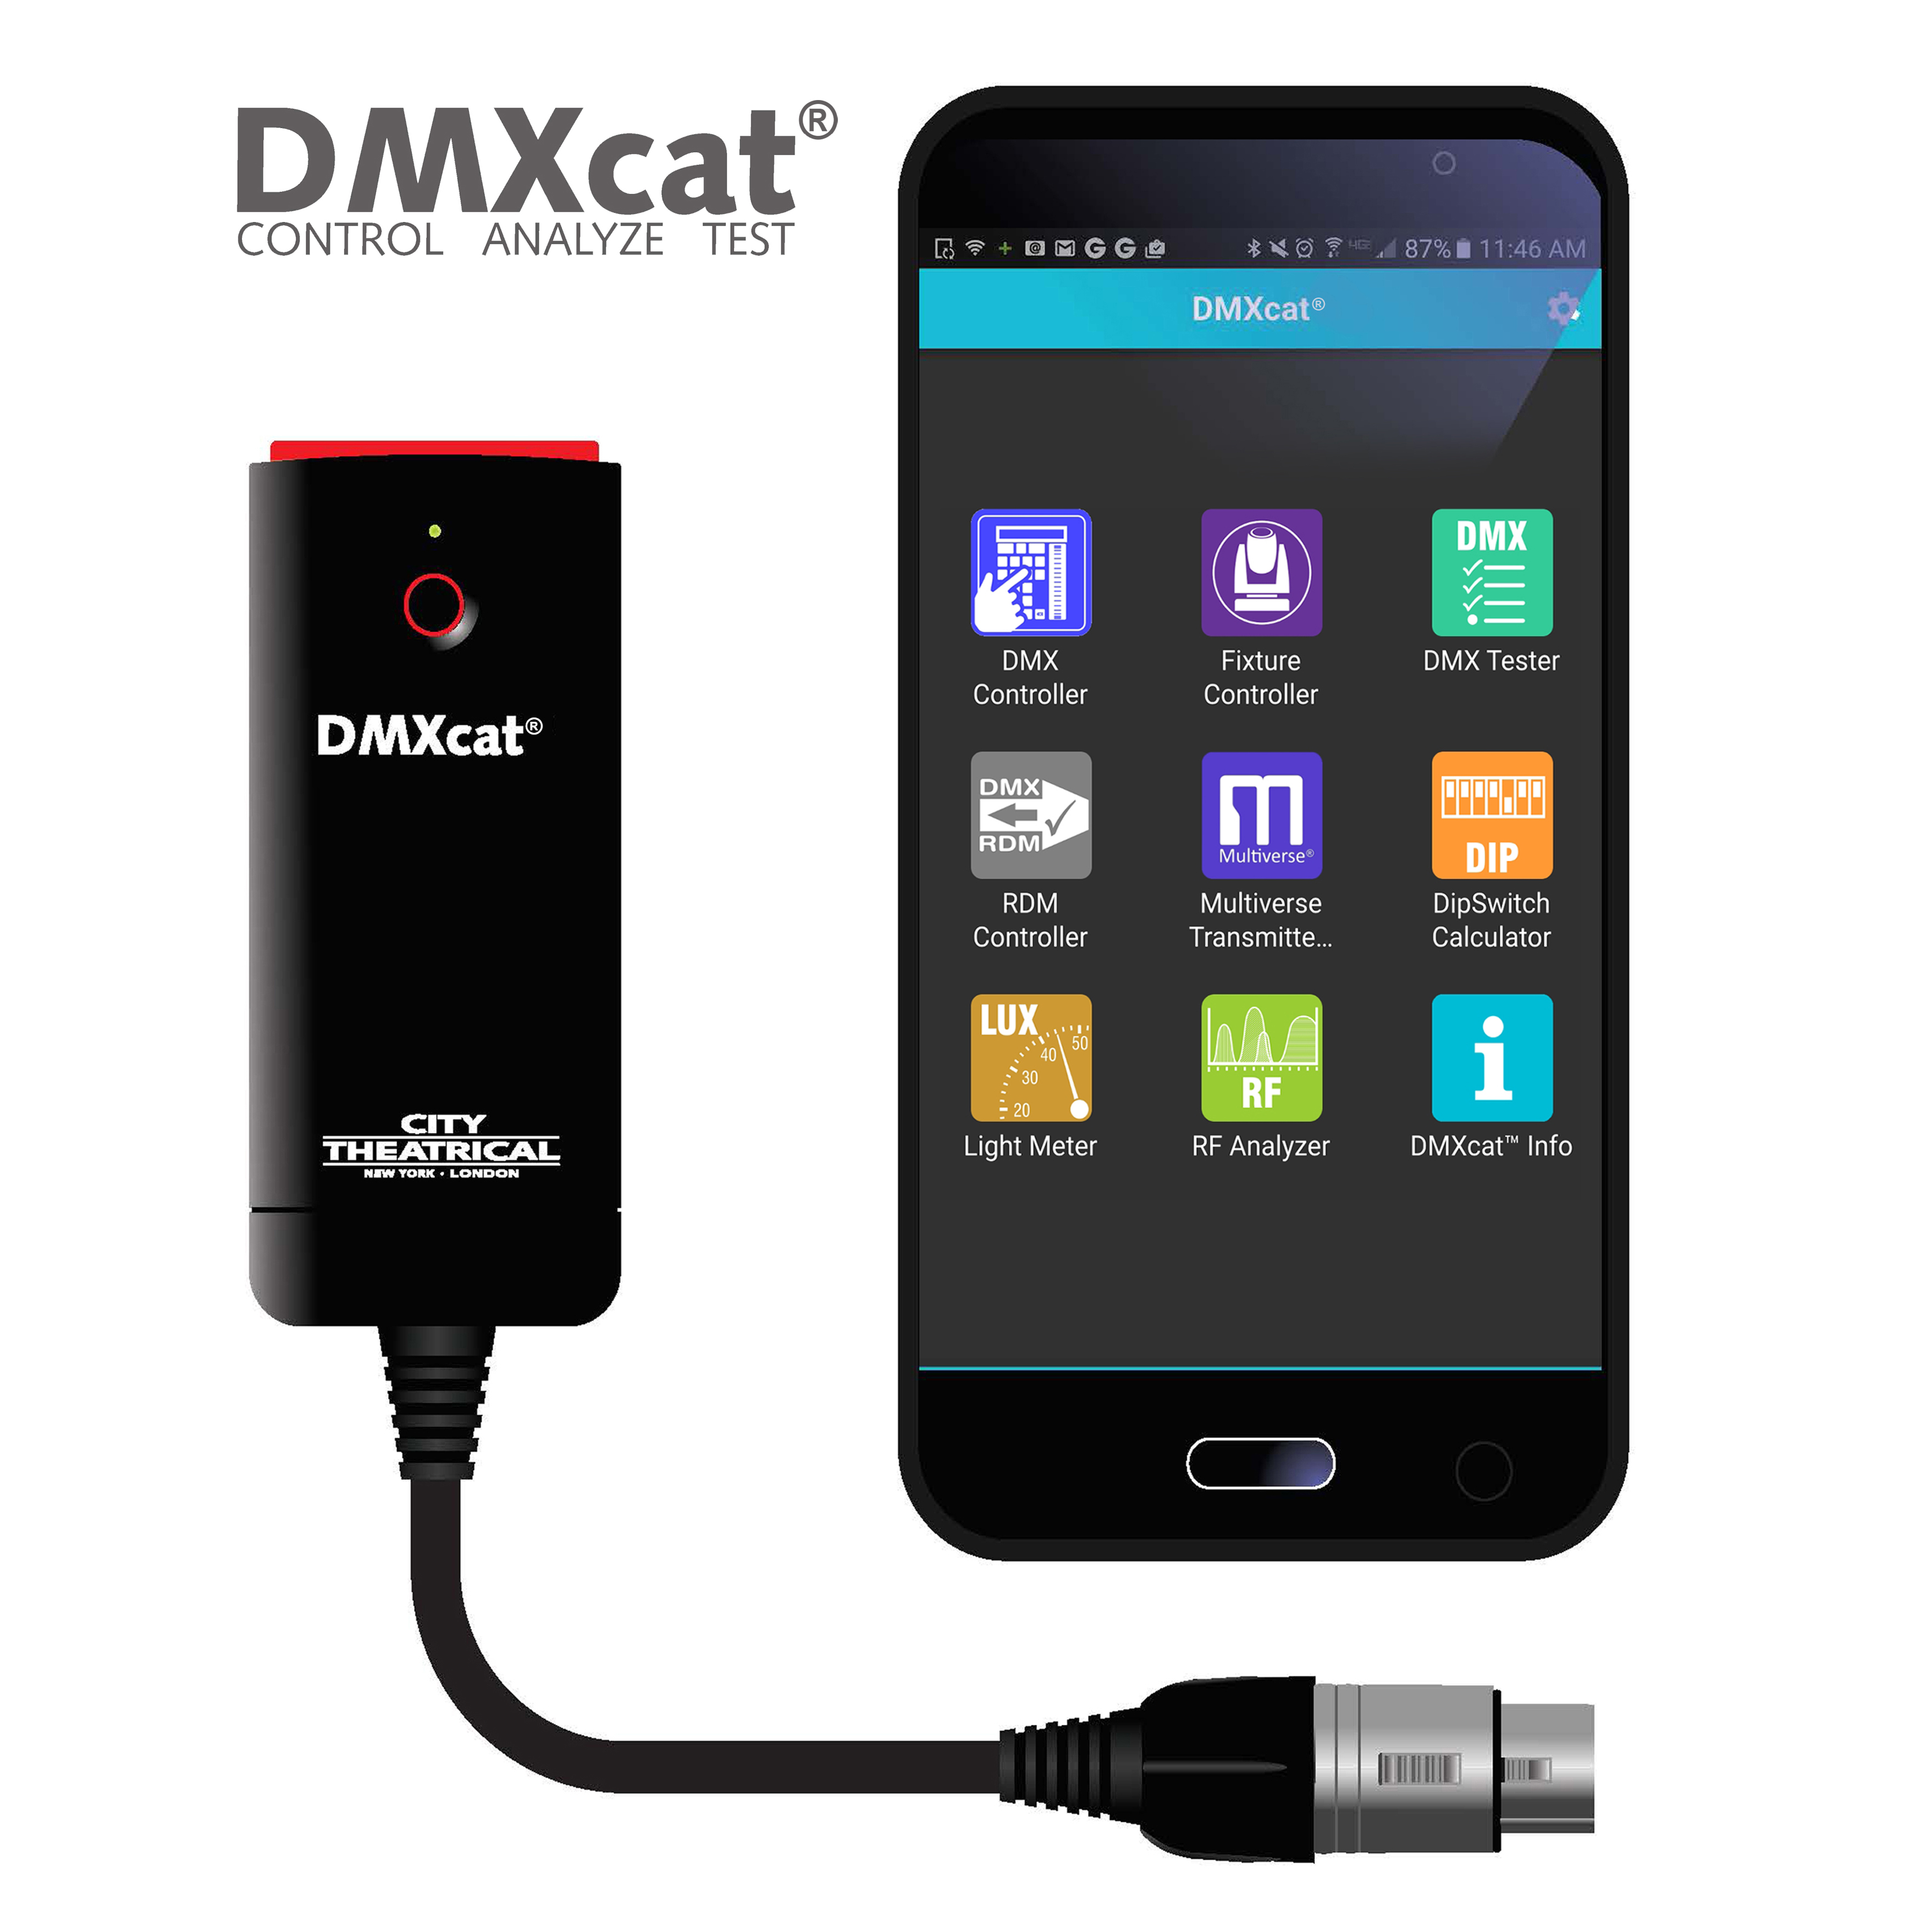 dmxcat multi function test tool with Multiverse Transmitter app